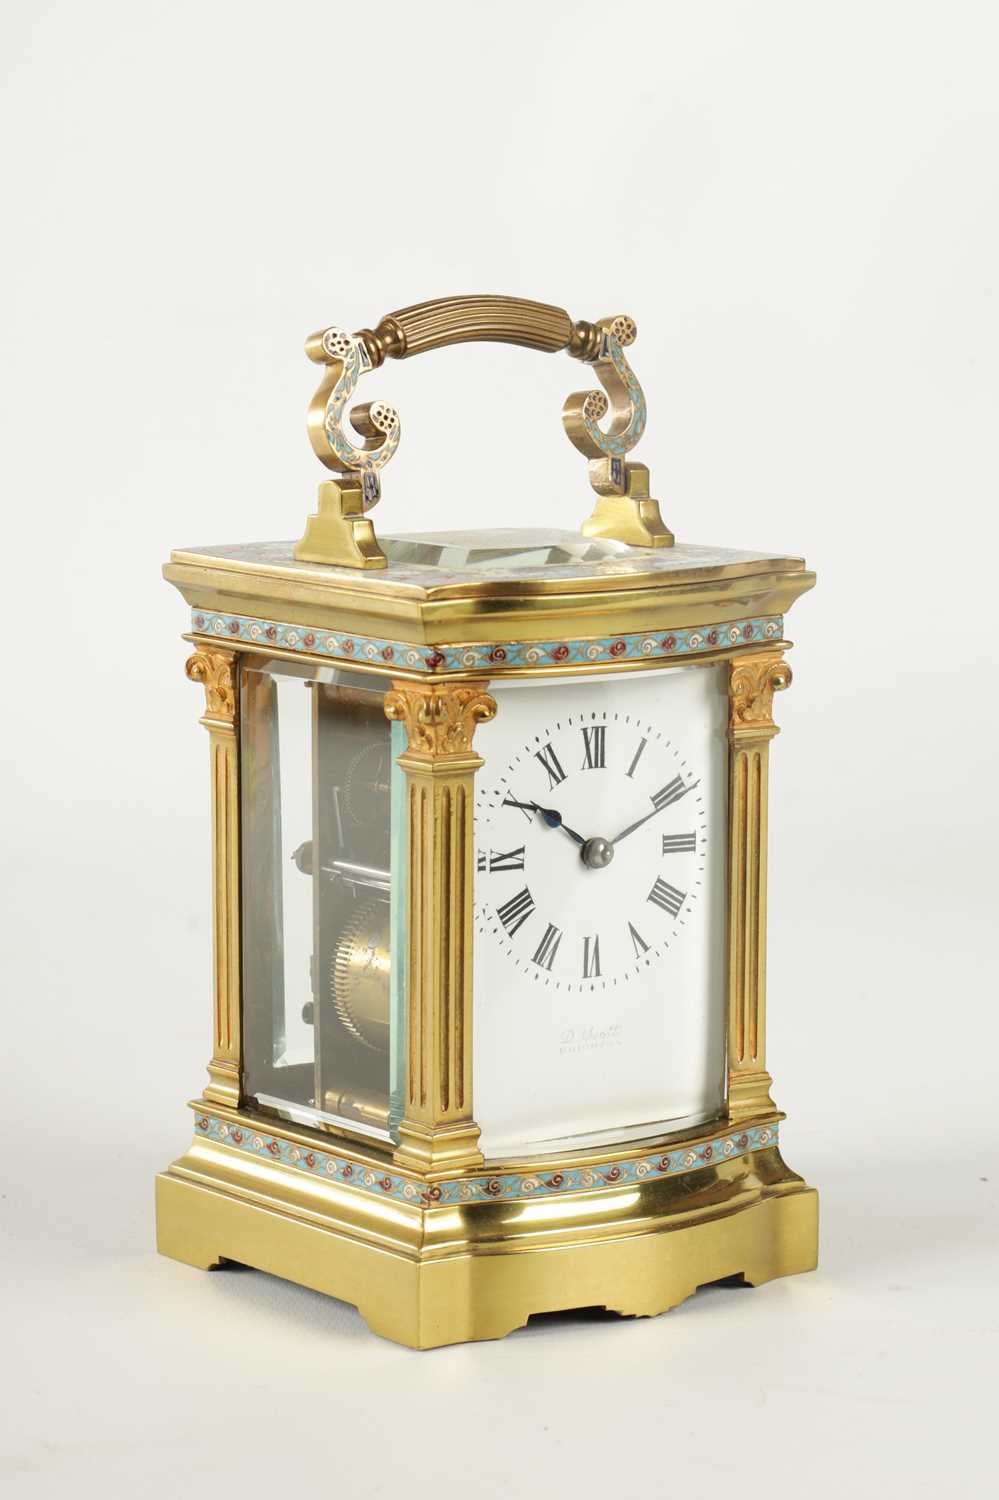 A LATE 19TH CENTURY FRENCH CHAMPLEVE ENAMEL STRIKING CARRIAGE CLOCK - Image 4 of 8